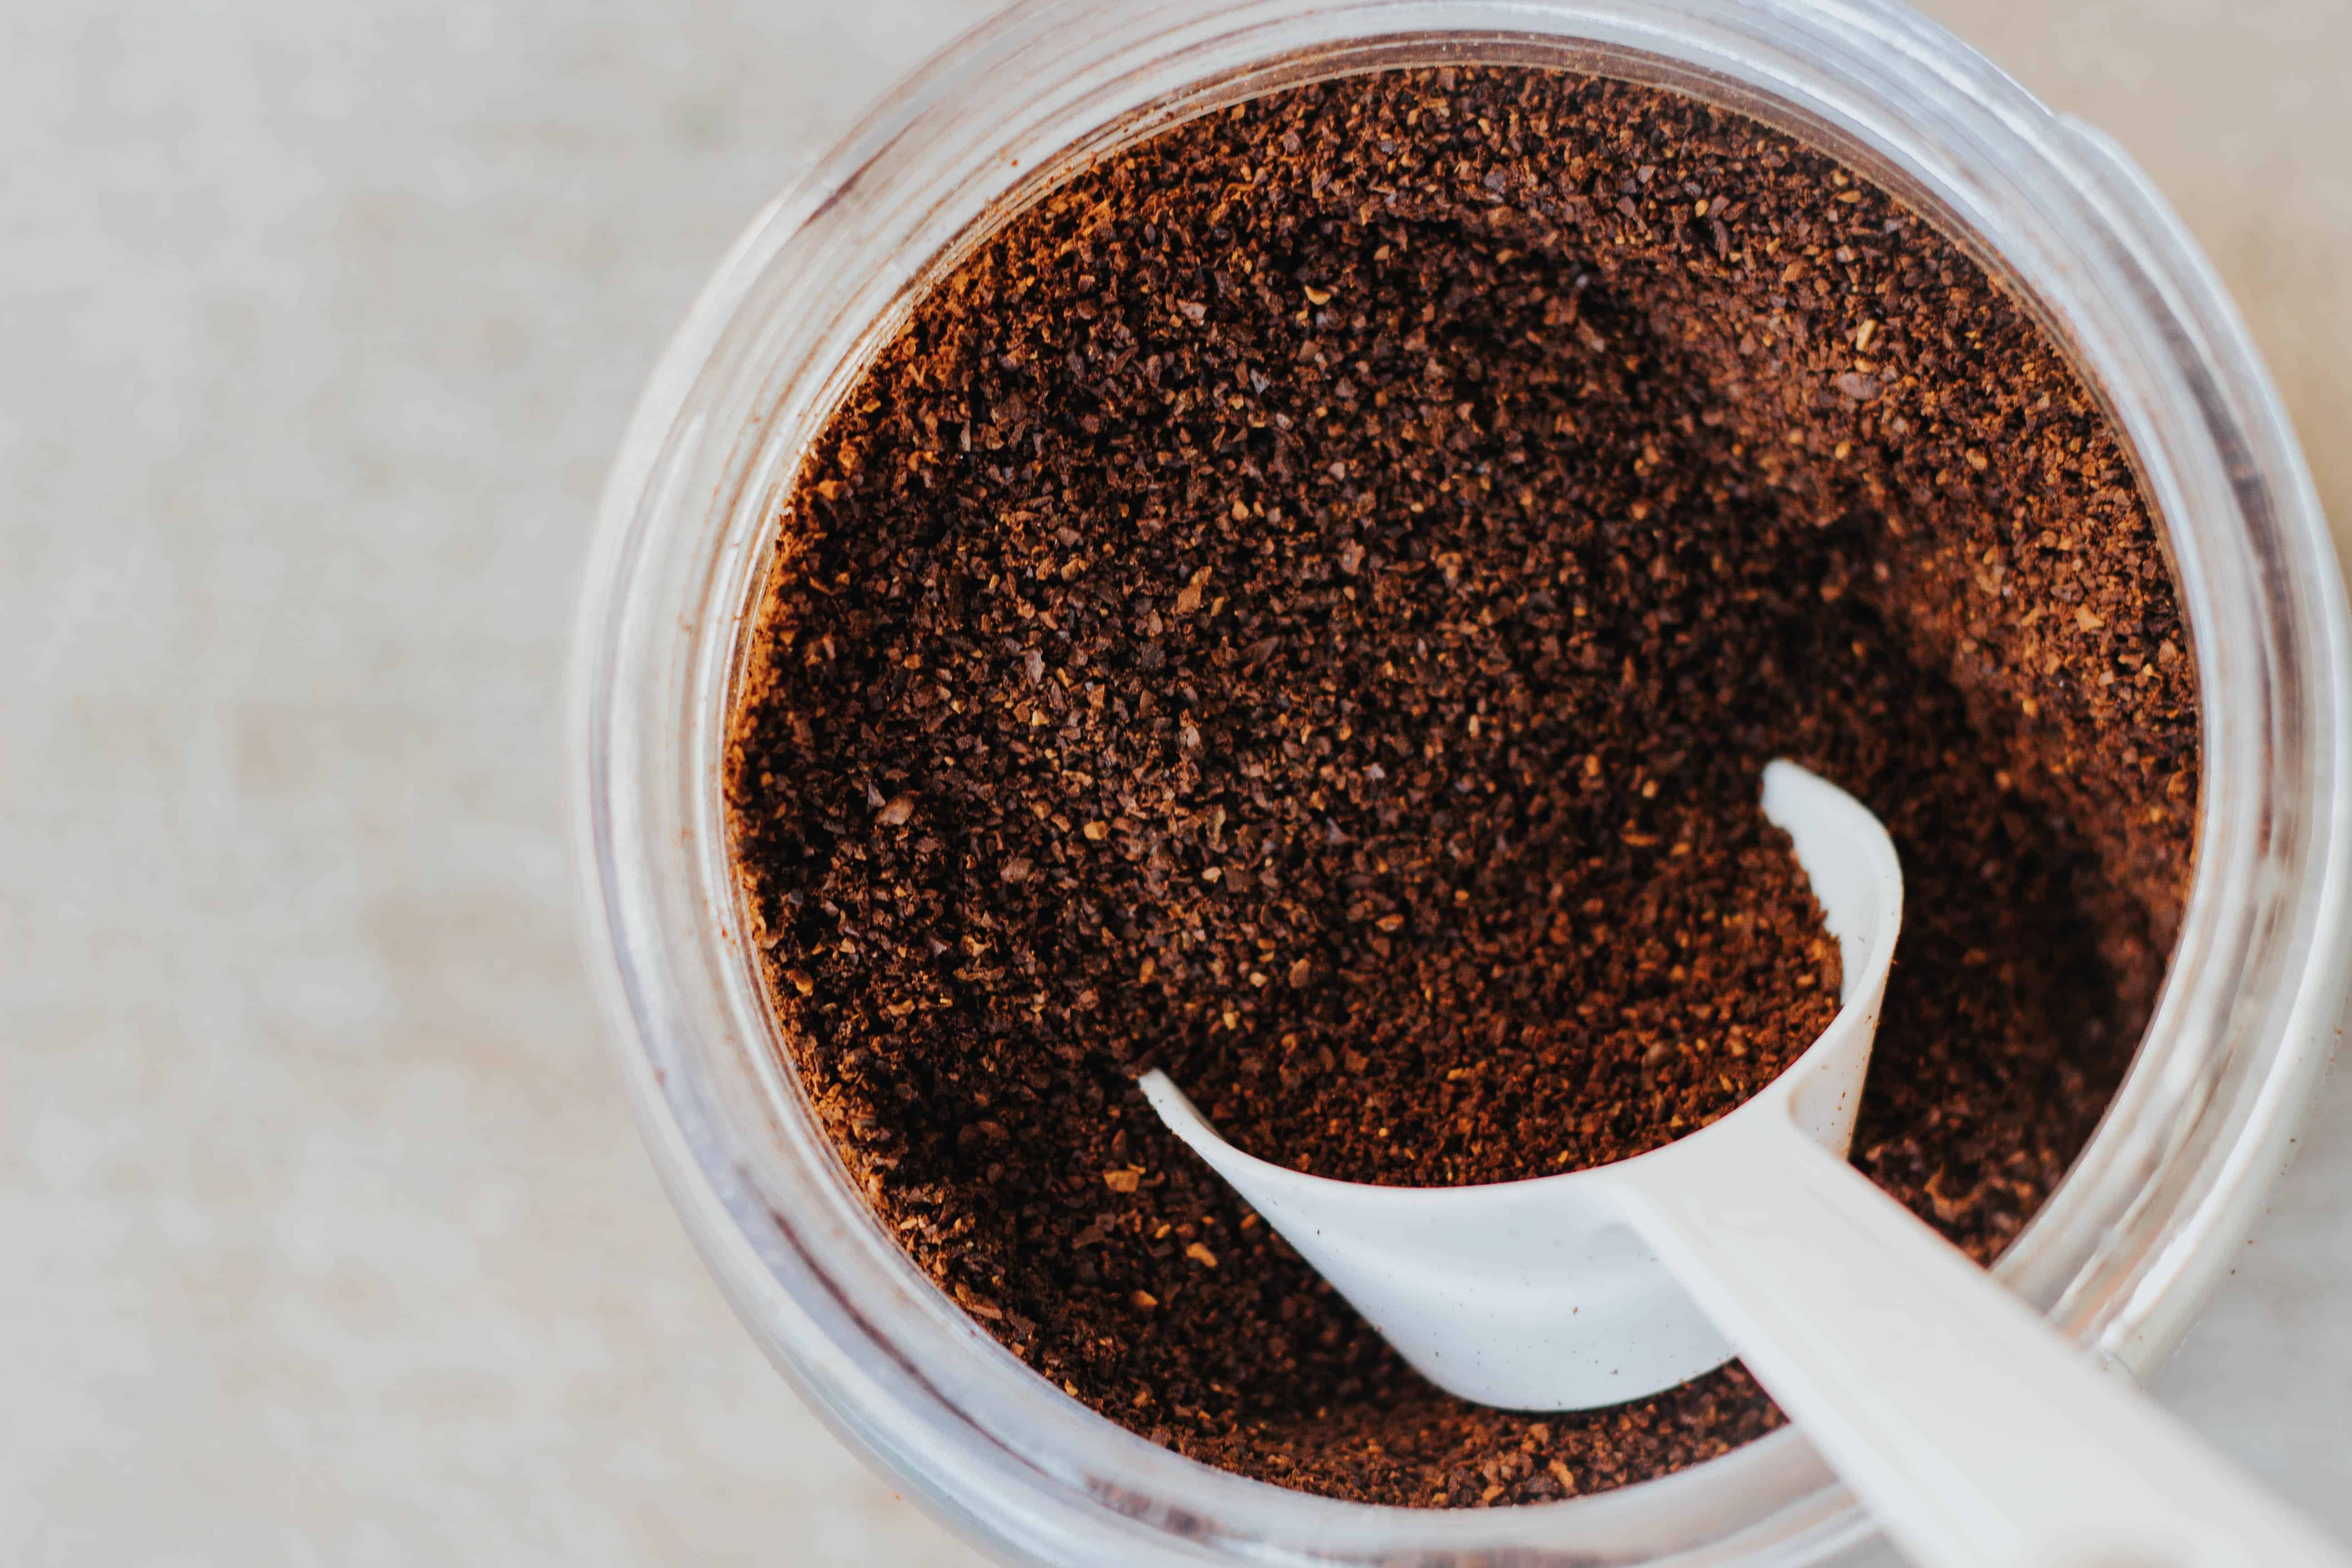 How Long Does Ground Coffee Last: Understanding Coffee Freshness